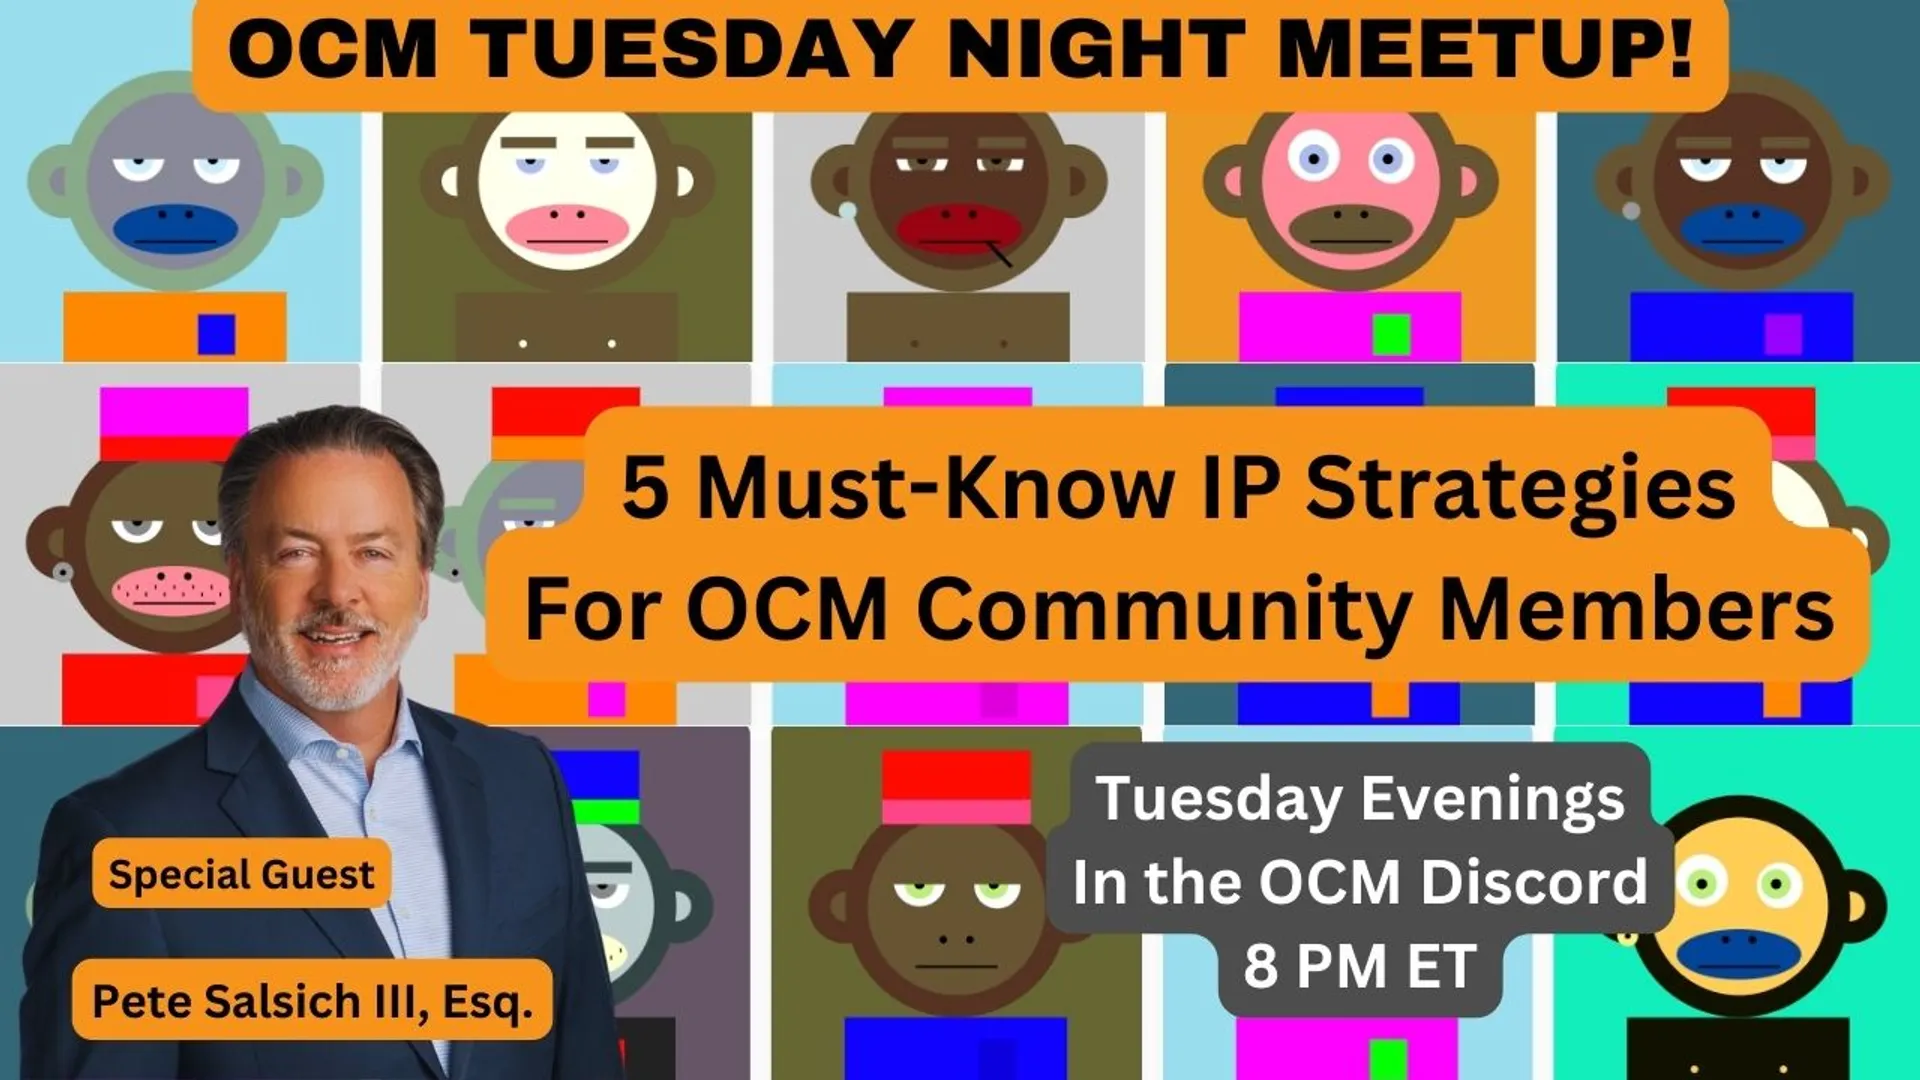 Tonight in our OCM Discord. Please join us!